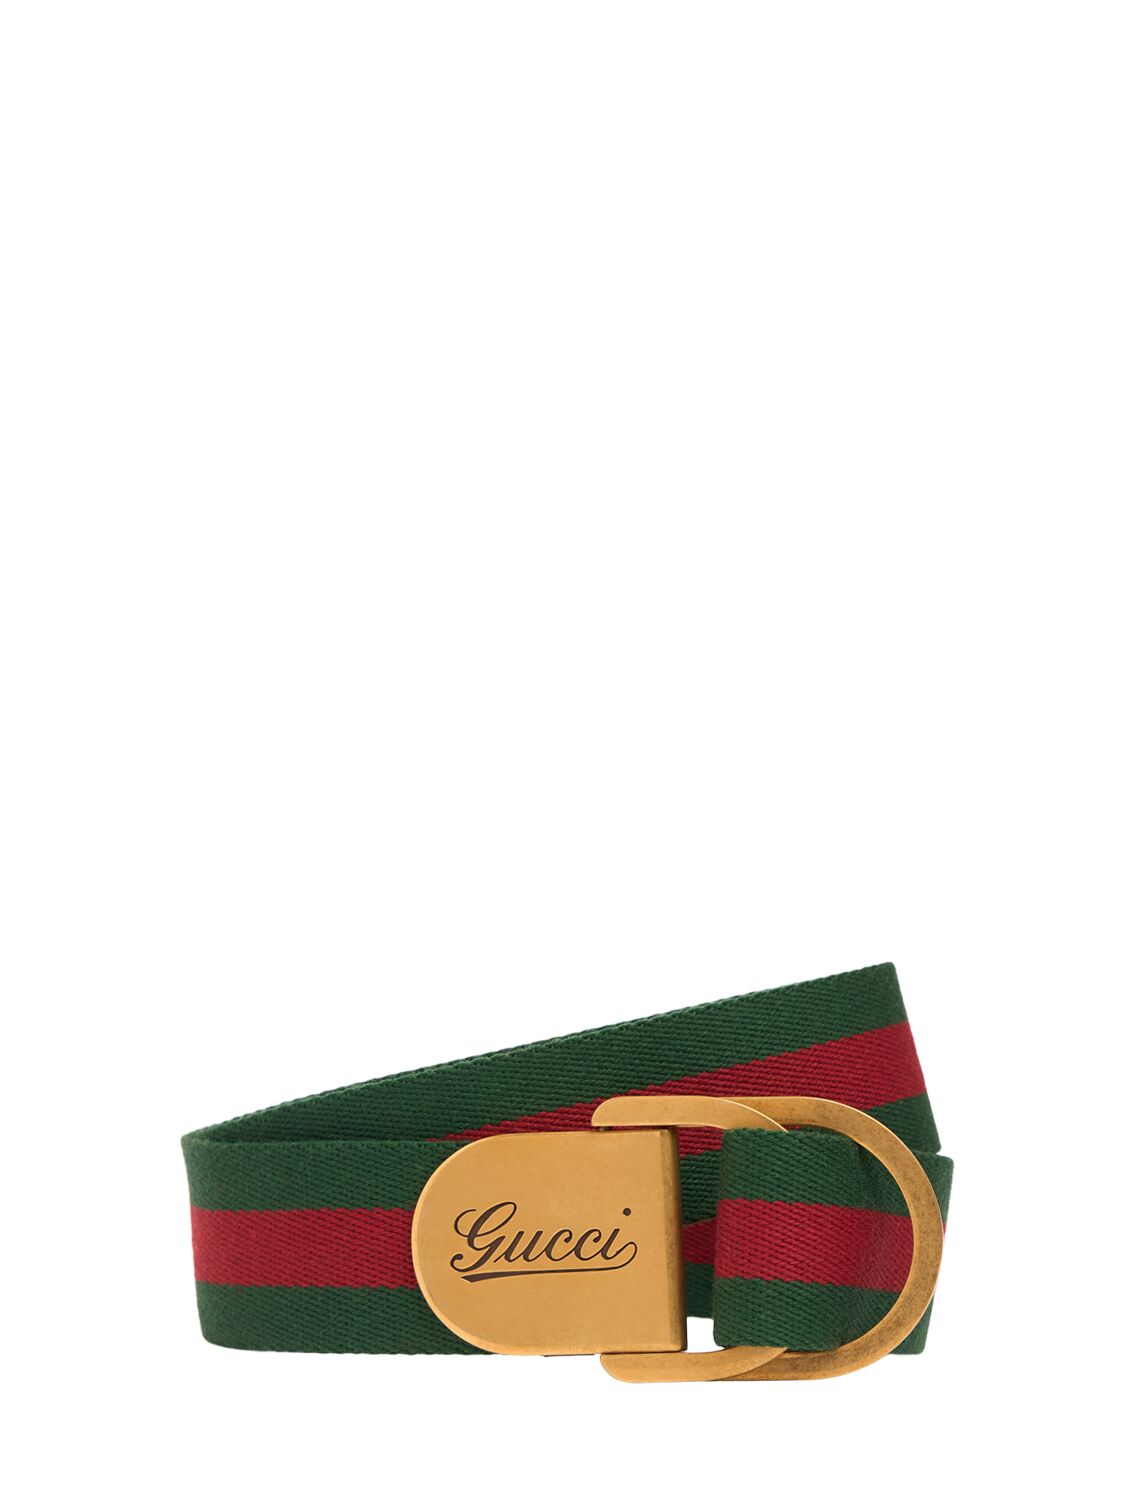 Gucci 4cm D Ring Reversible Leather Belt In Green/red